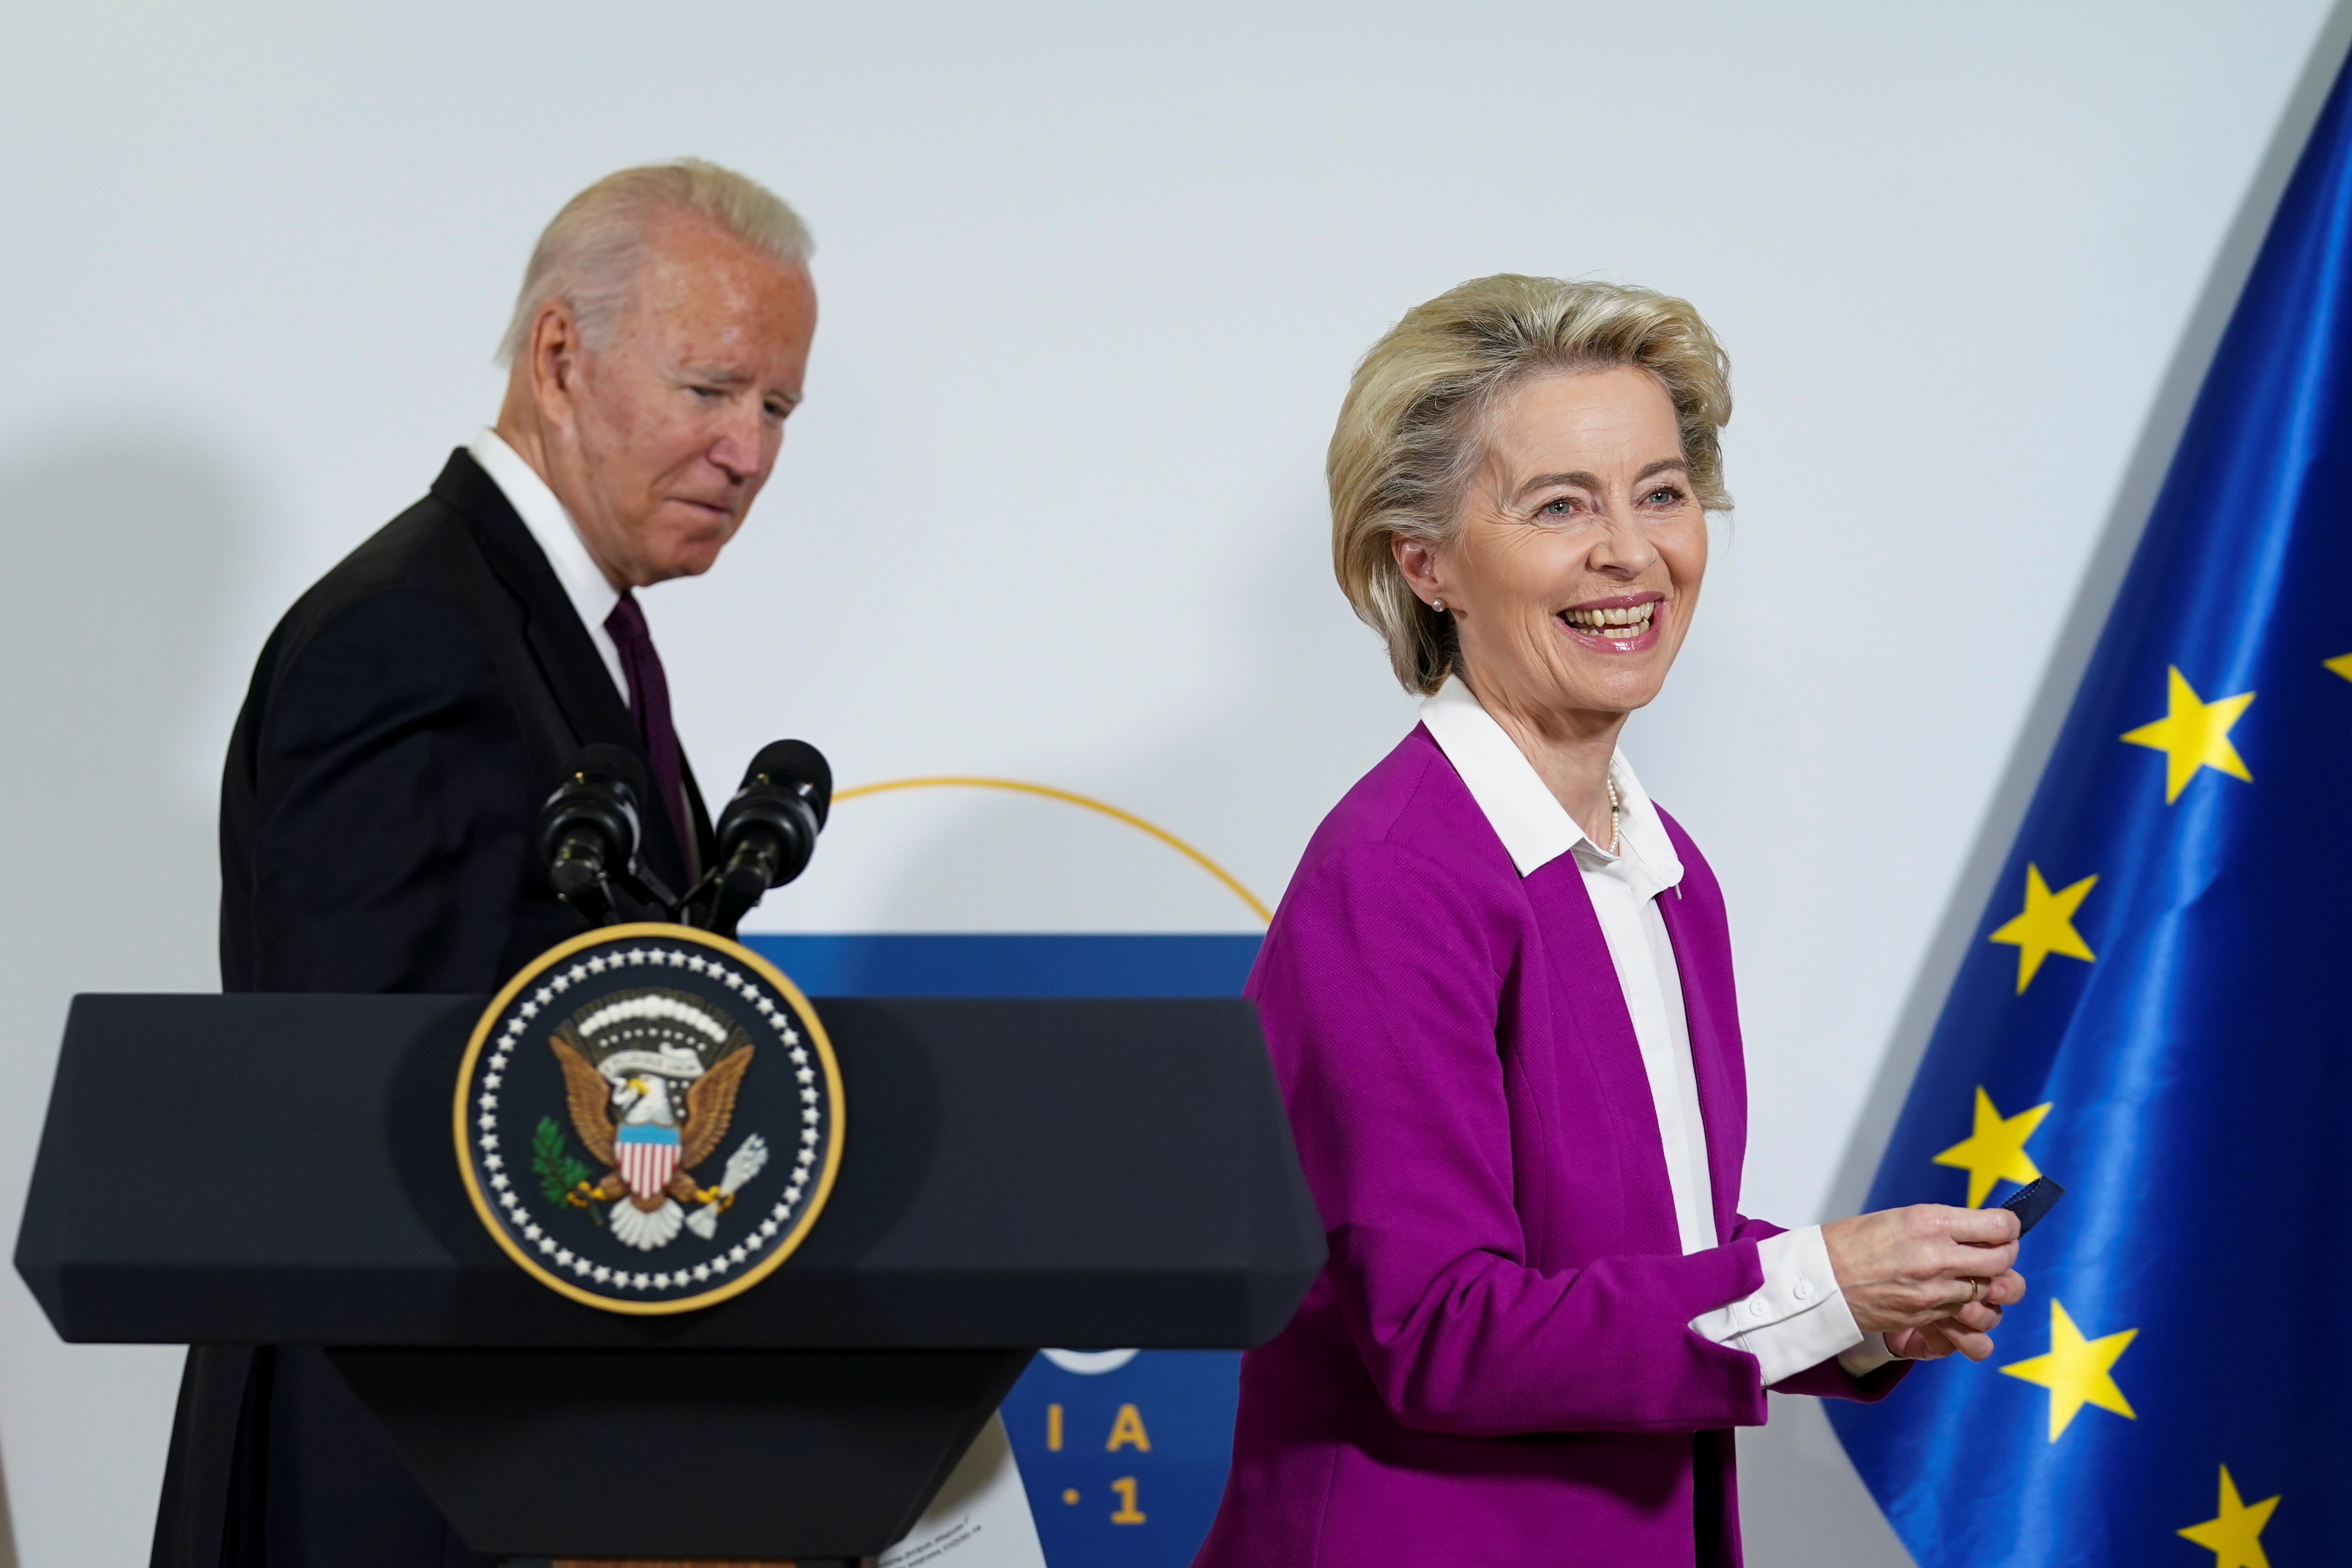 U.S. President Joe Biden and European Commission's President Ursula von der Leyen leave after speaking about steel and aluminium tariffs, on the sidelines of the G20 leaders' summit in Rome, Italy October 31, 2021. REUTERS/Kevin Lamarque